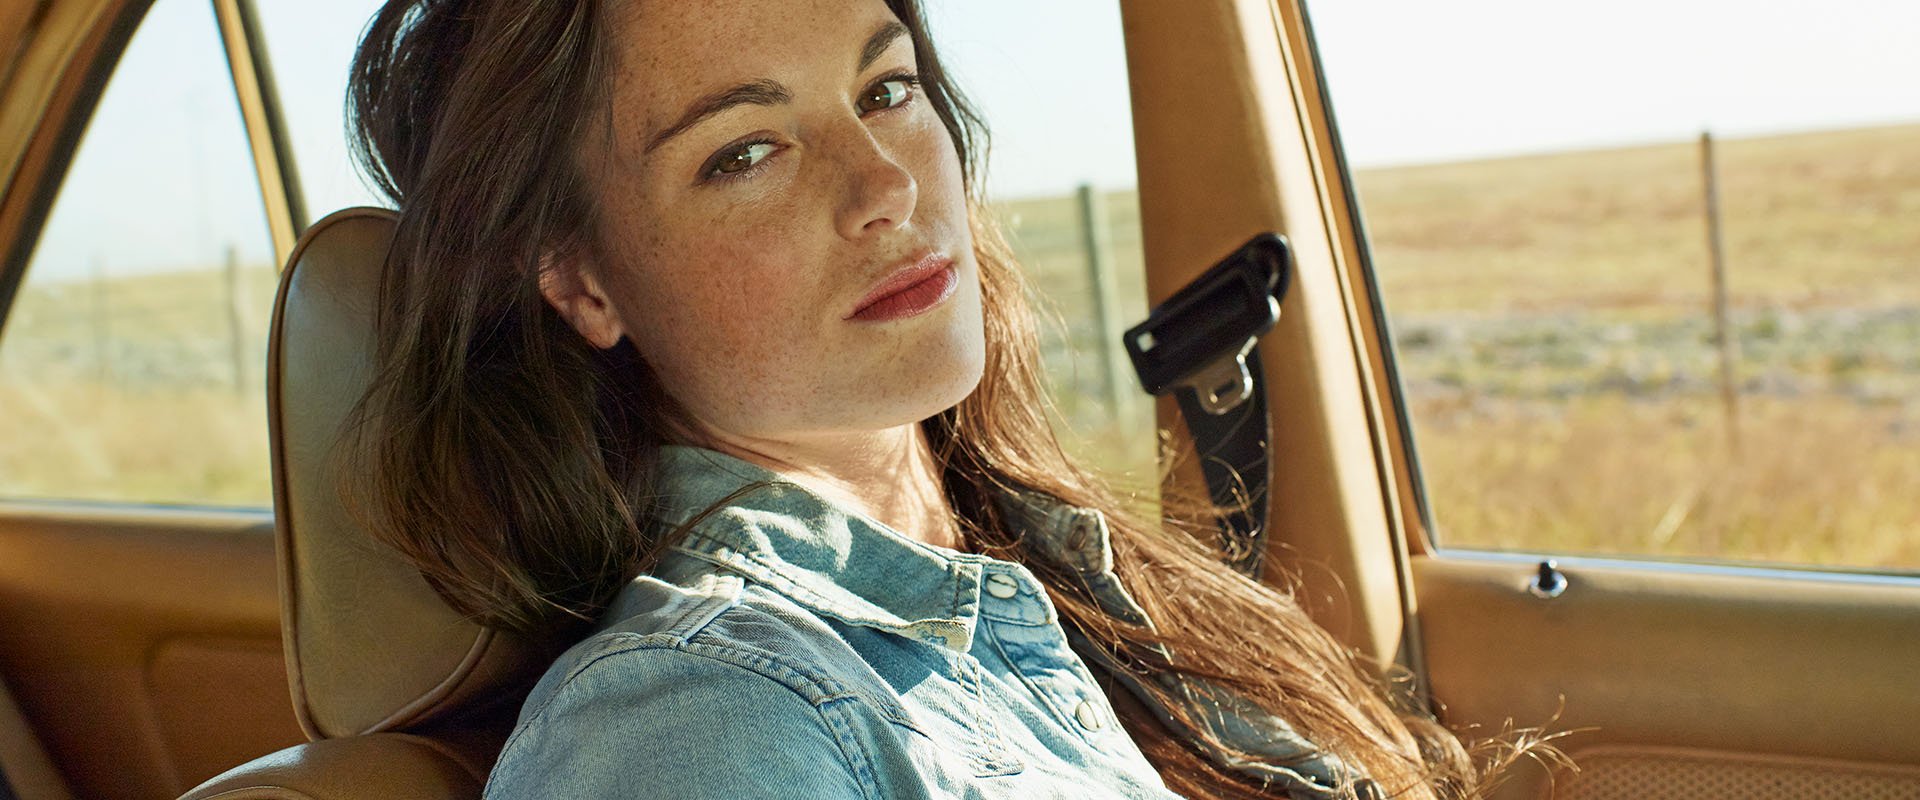 A woman sitting in a car, looking directly at the camera with a serious face.